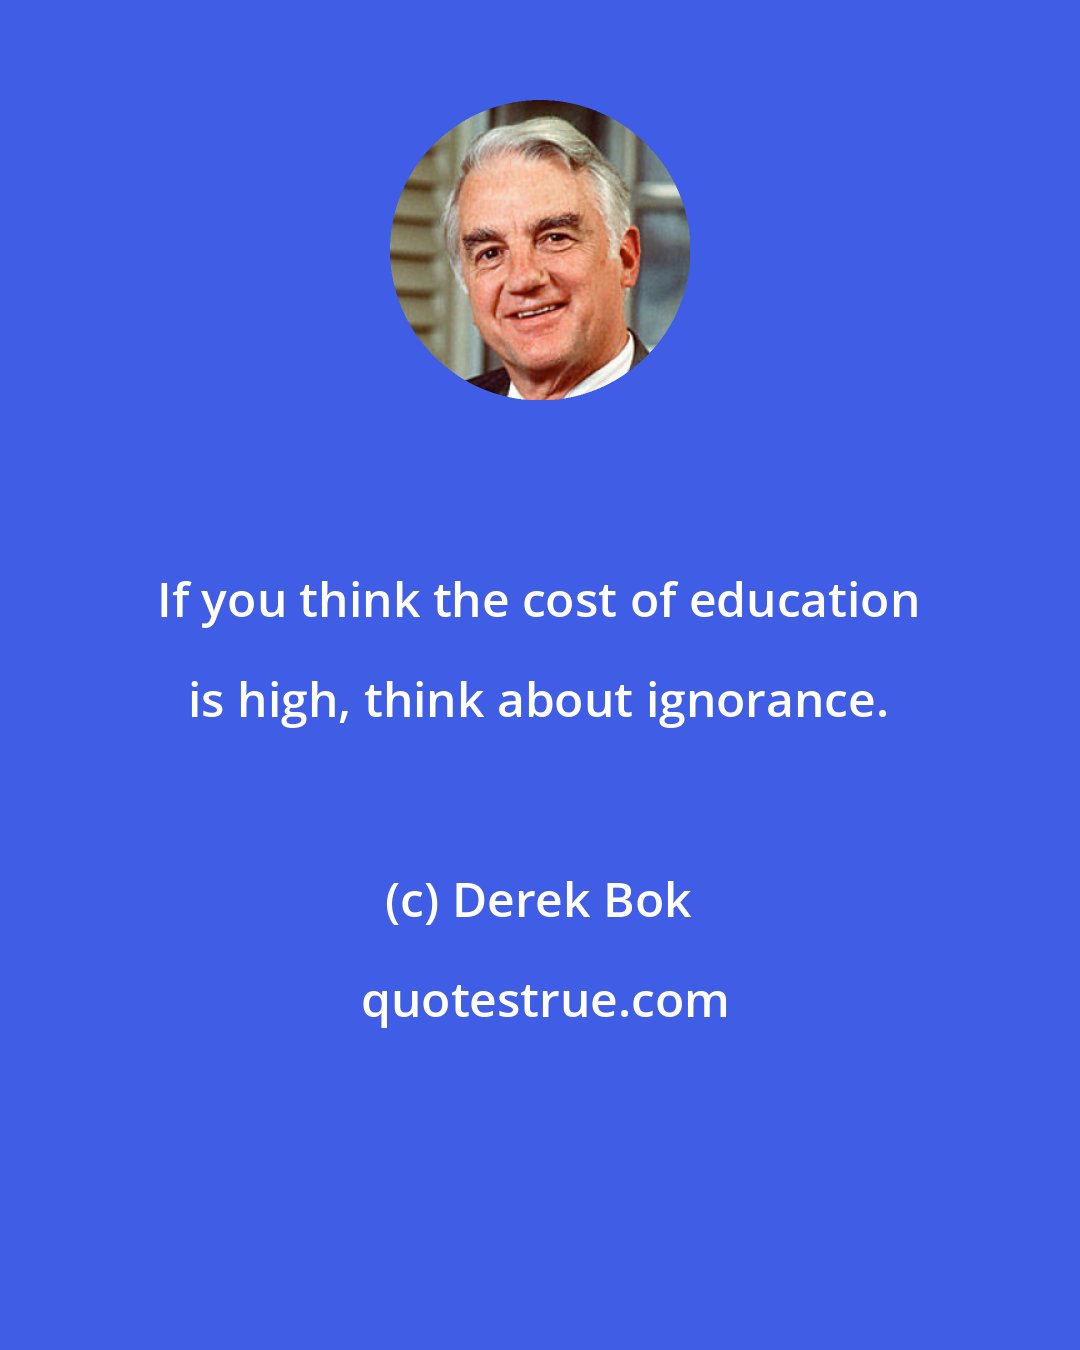 Derek Bok: If you think the cost of education is high, think about ignorance.